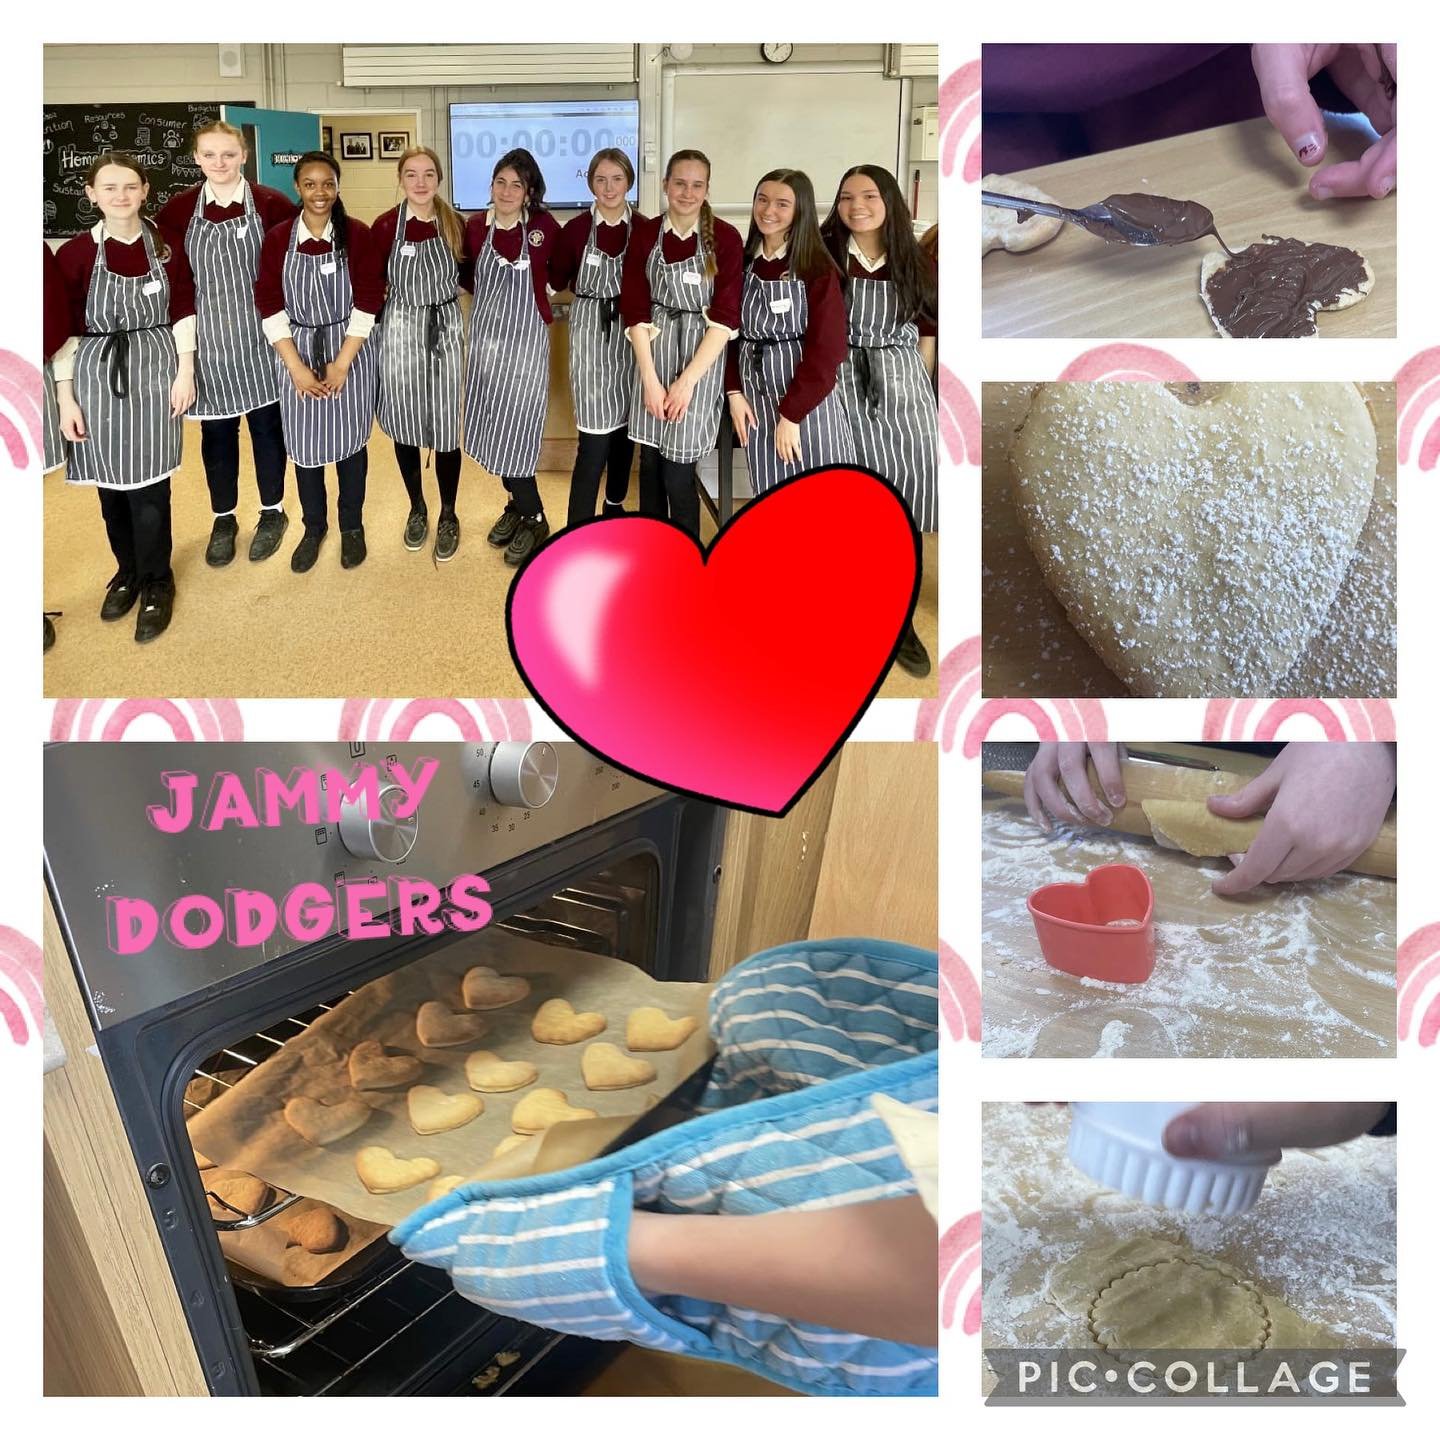 😃SCHOOL IN ACTION DAY 😃Some more photos of activities the local 5th class students enjoyed at Pres yesterday. 

They baked Jammy Dodgers in the Home Ec room, learned how to use the microscope in the Science lab, practiced artistic symmetry in the A